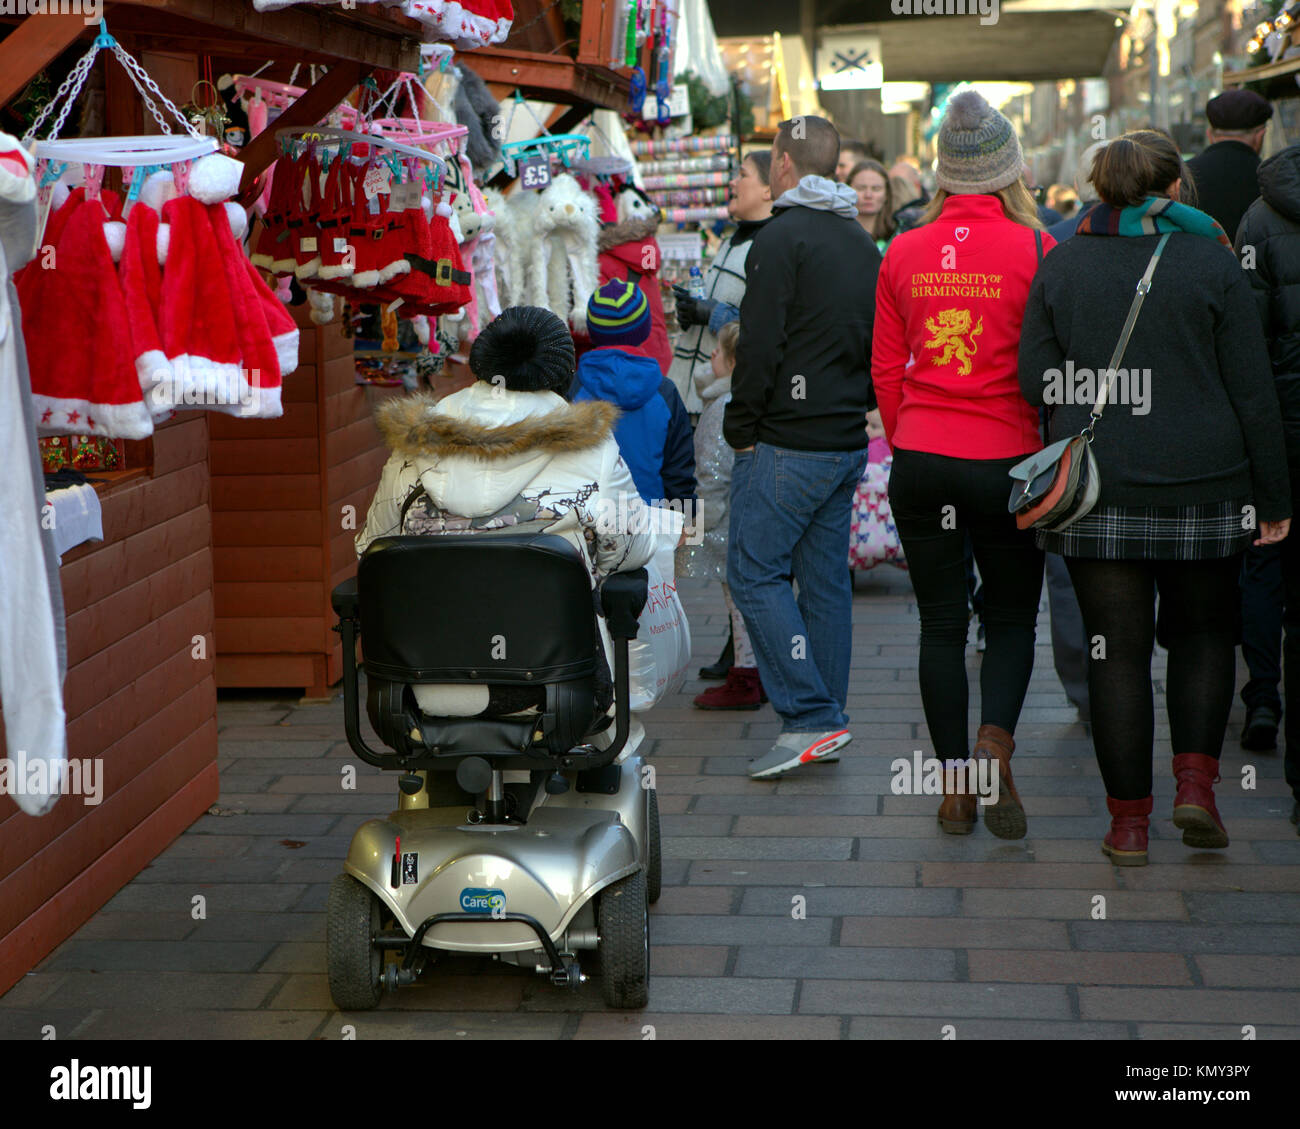 invalid car disability vehicle struggling in crowd christmas market glasgow stalls and people Stock Photo